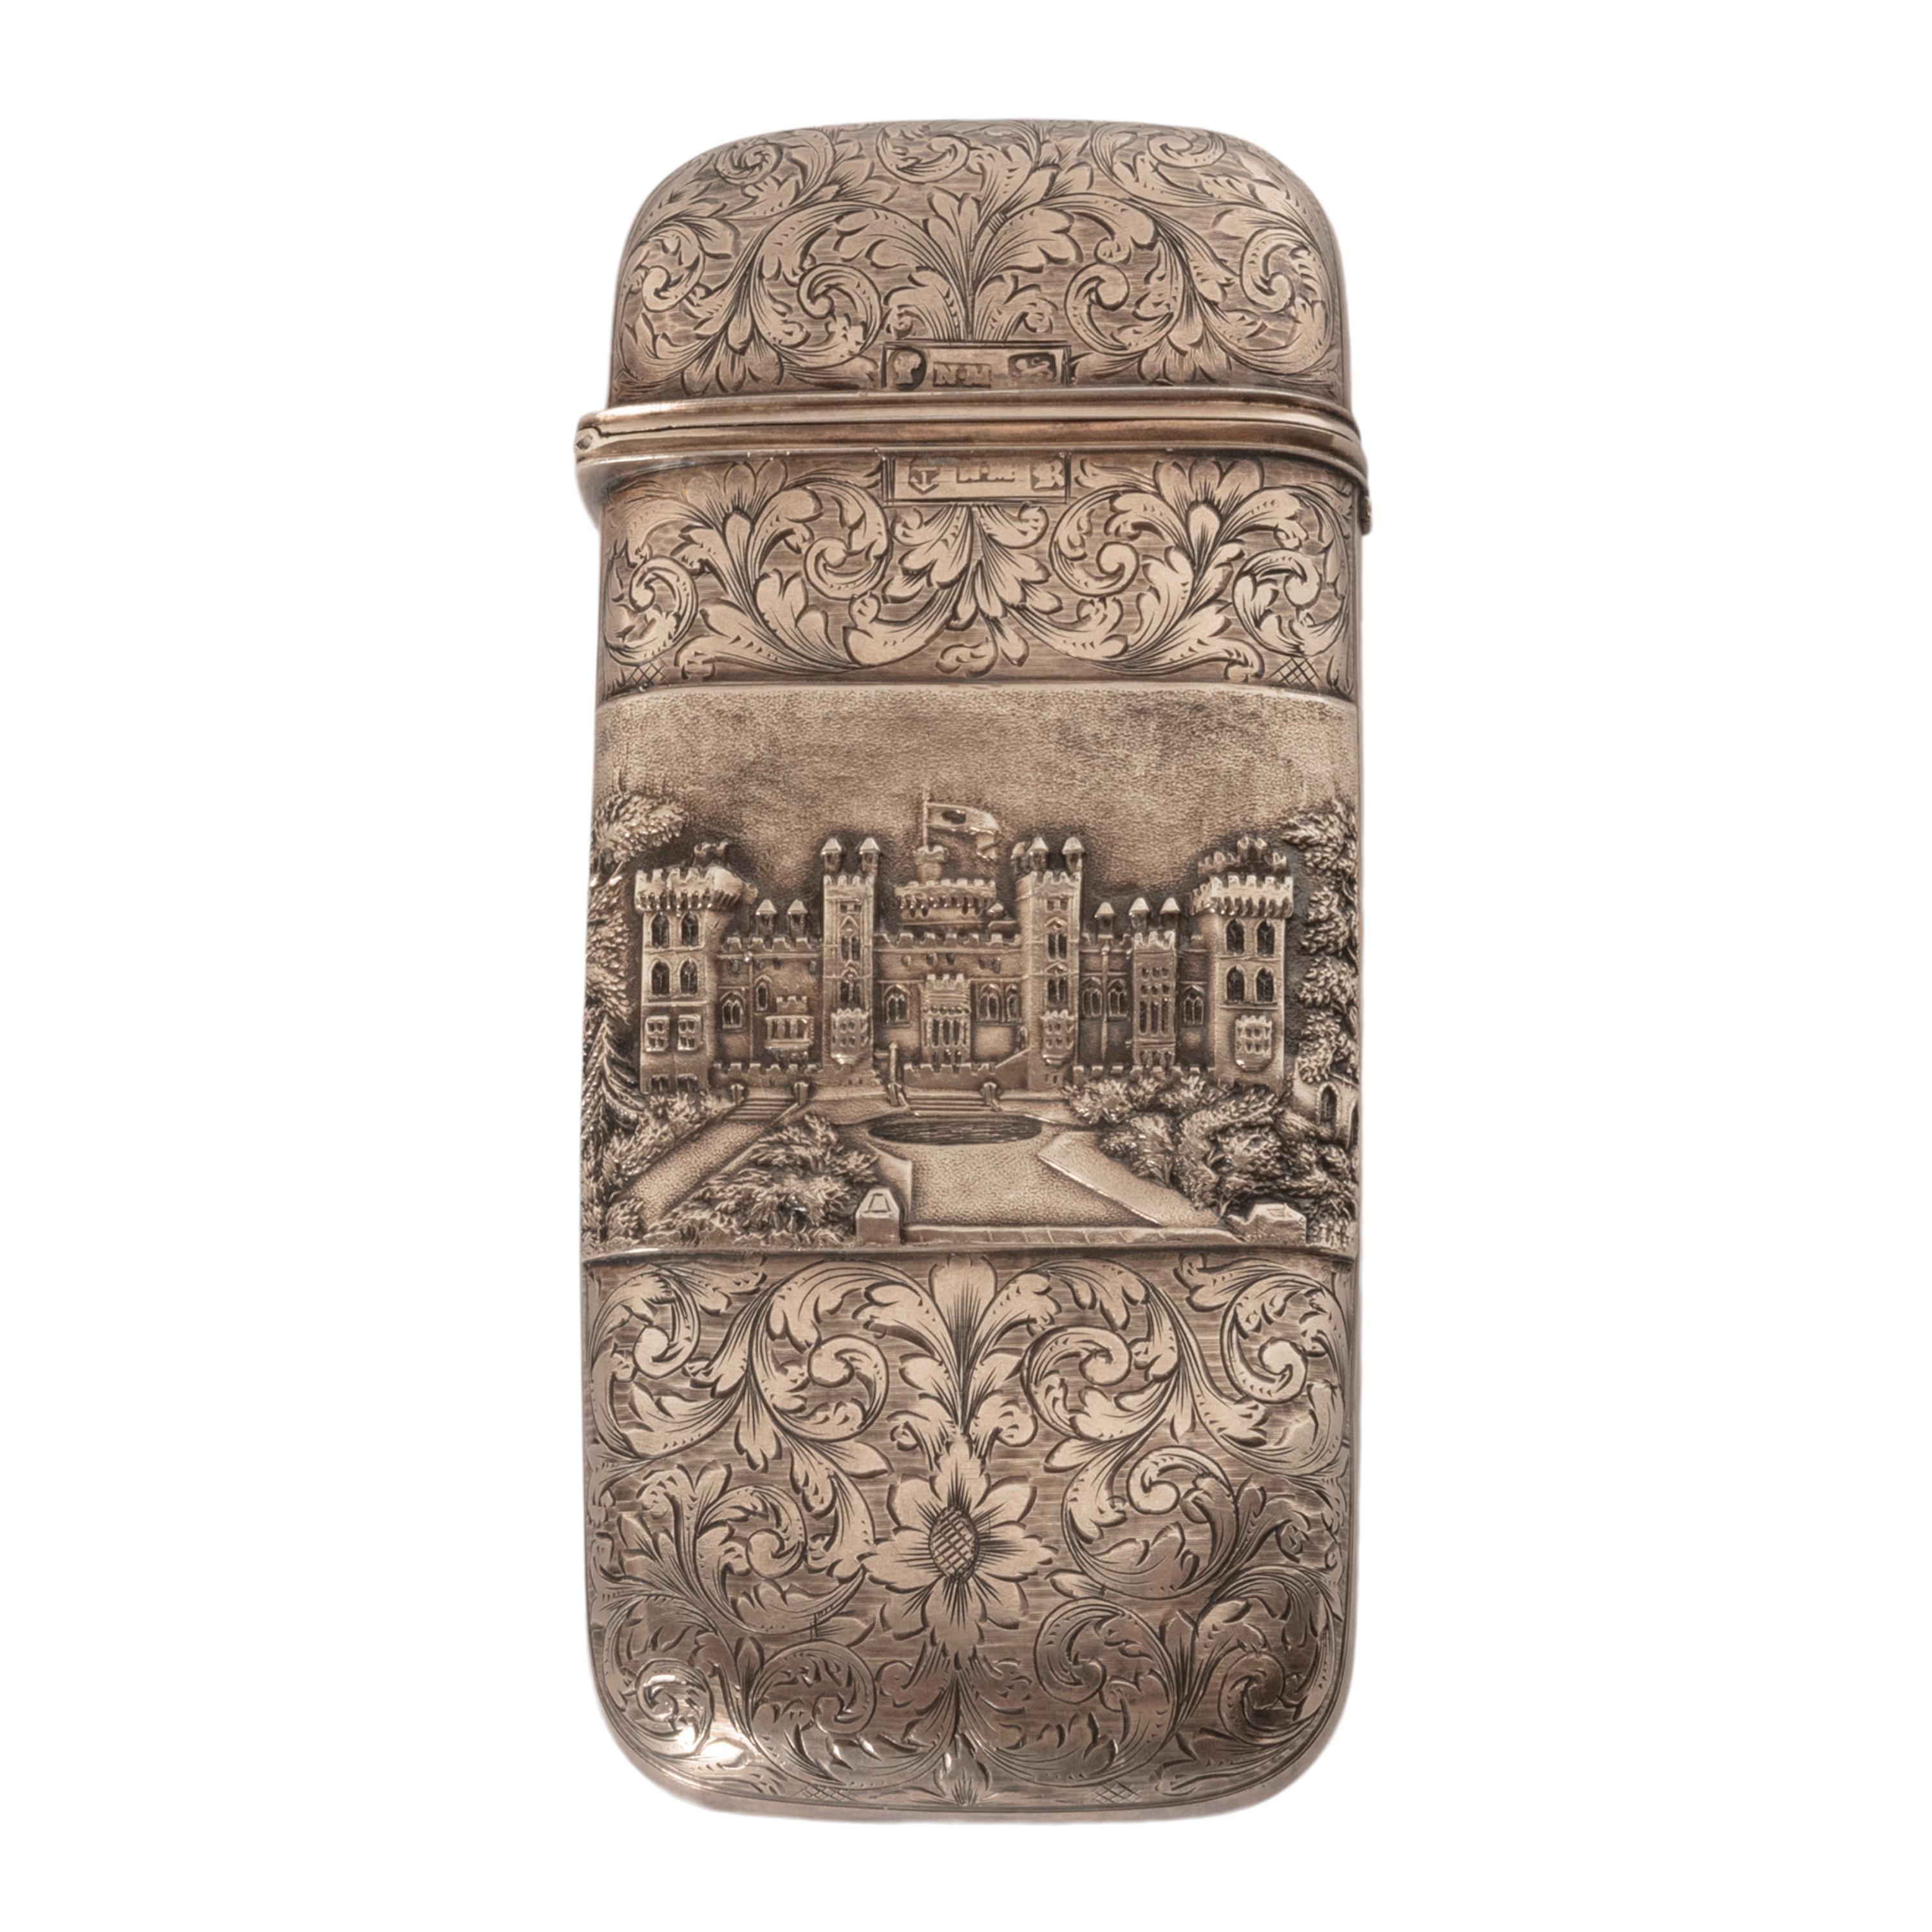 A very fine antique repousse work & engraved sterling silver gilt castle top cigar/cheroot case, Nathaniel Mills Birmingham 1840.
This very finely crafted silver case is made by the celebrated silversmith Nathaniel Mills. The case is engraved with